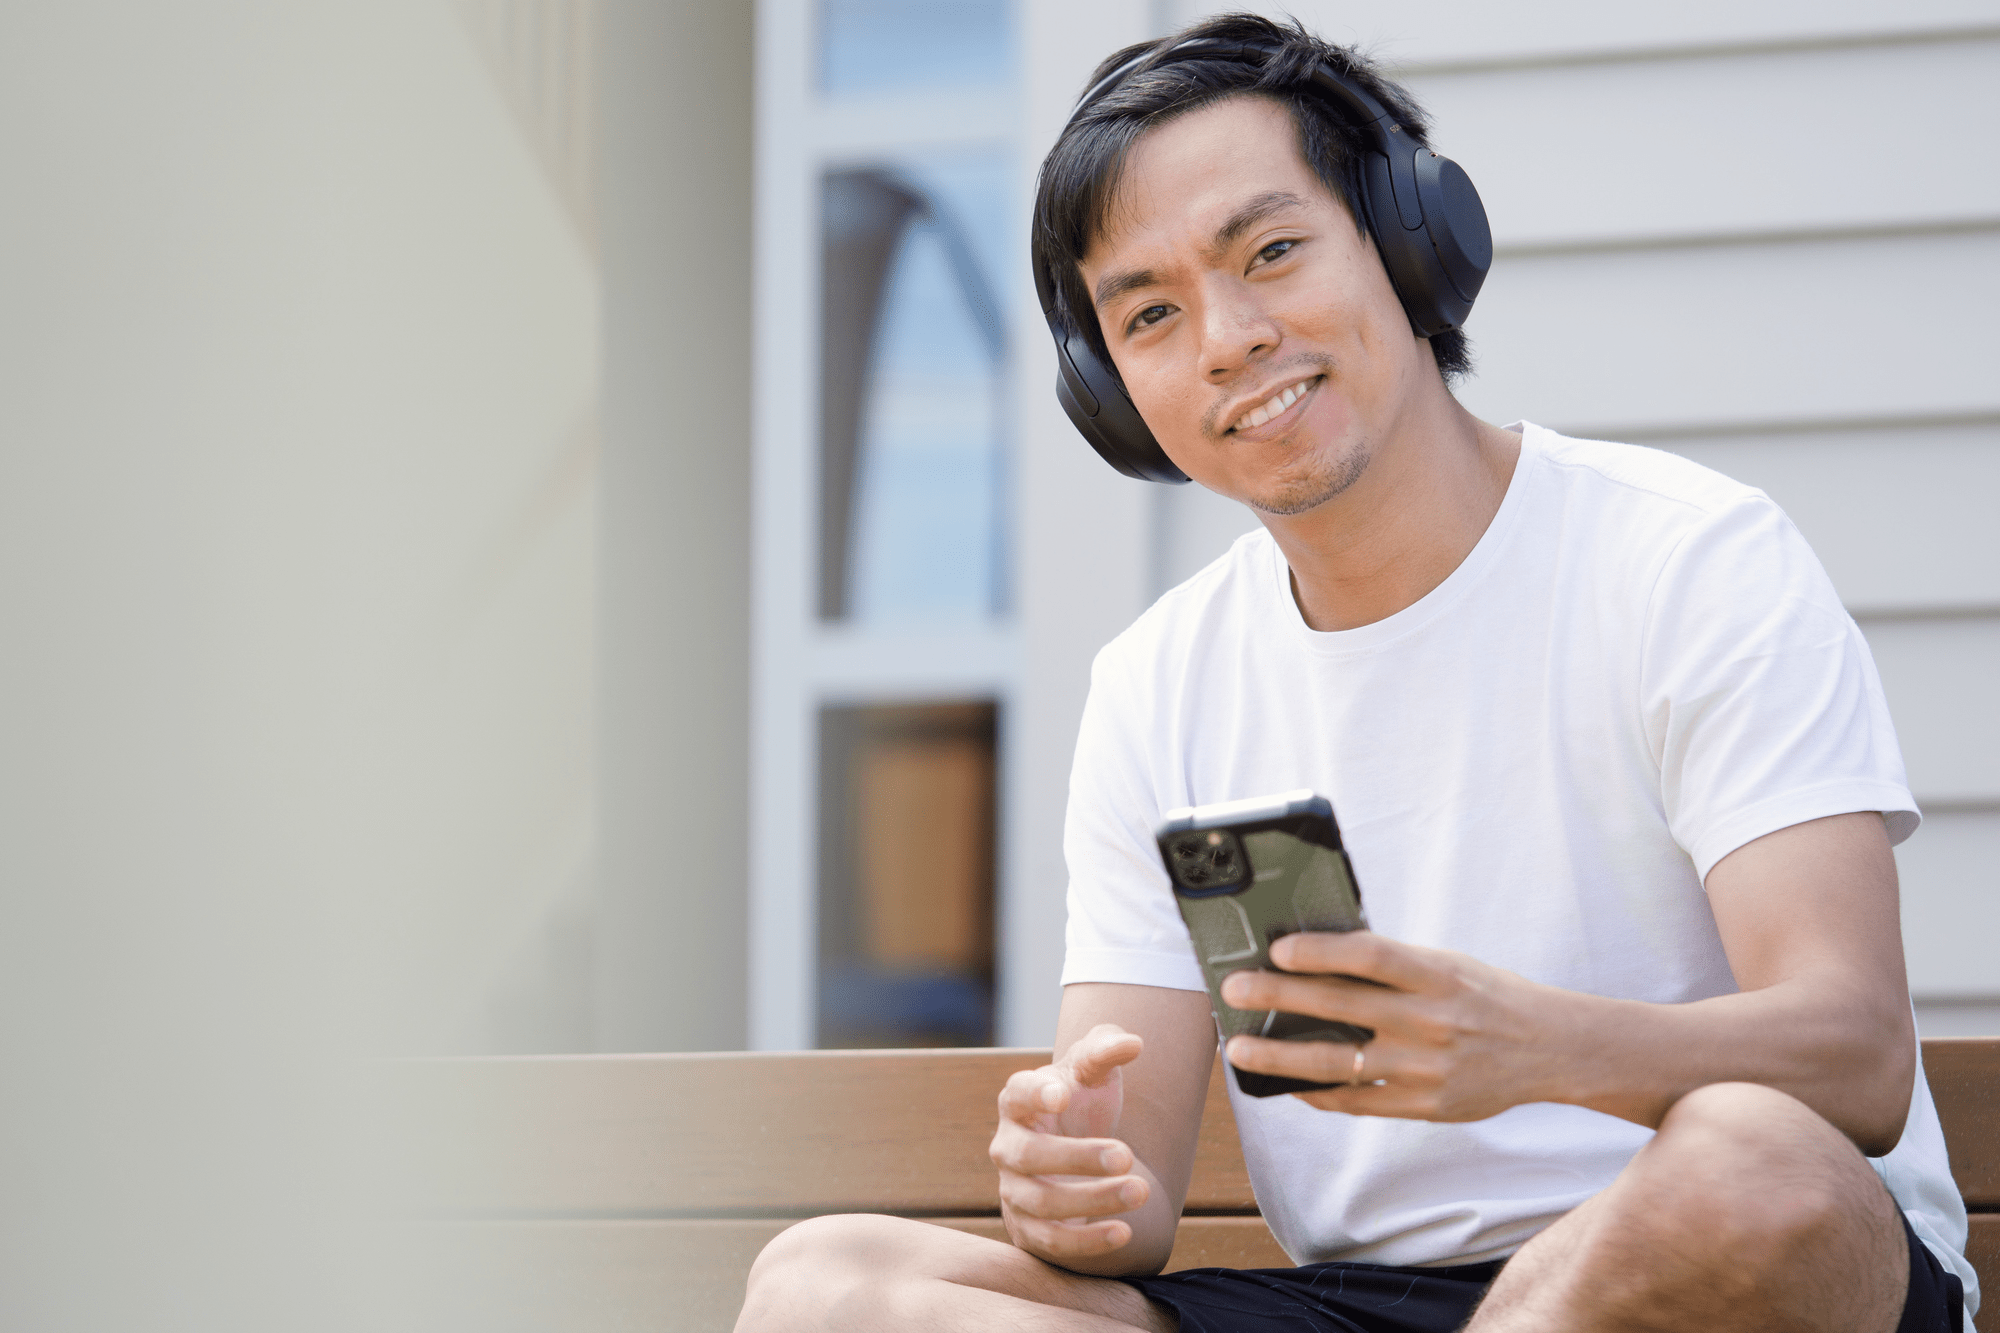 Man smiling with headphones on while holding a phone